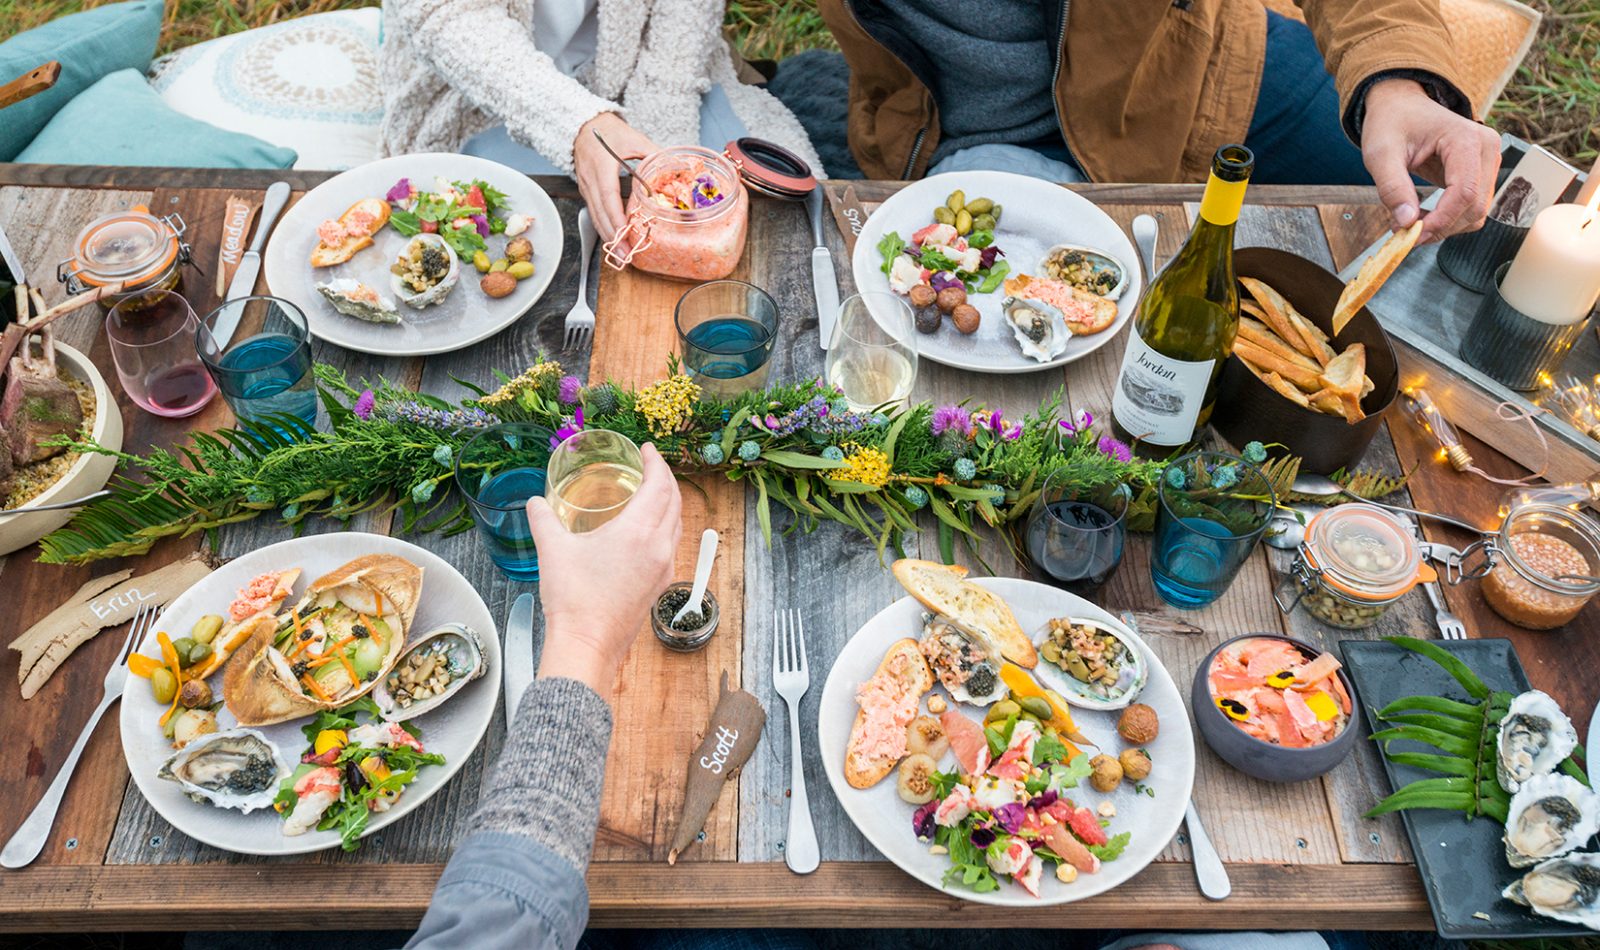 Full plates with crab salad, potatoes, salmon rillette and more at a coastal picnic